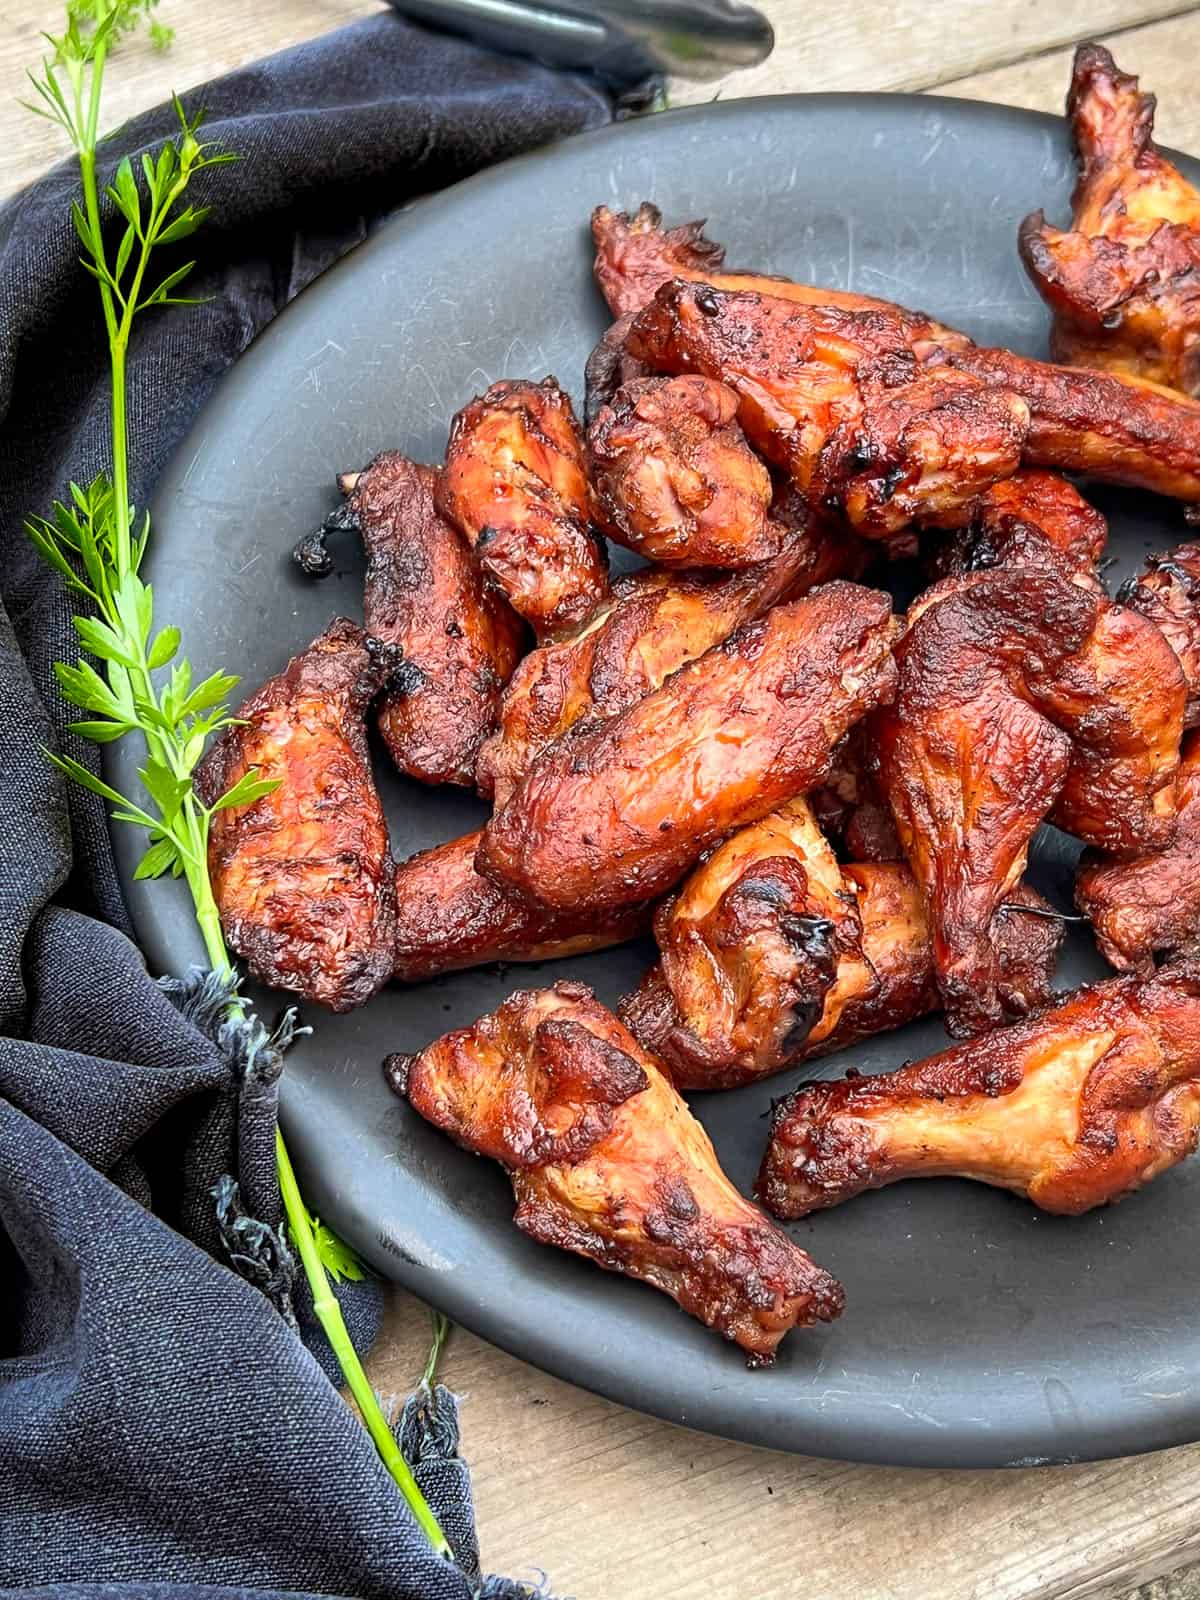 Smoked wings on a black plate with green garnish.